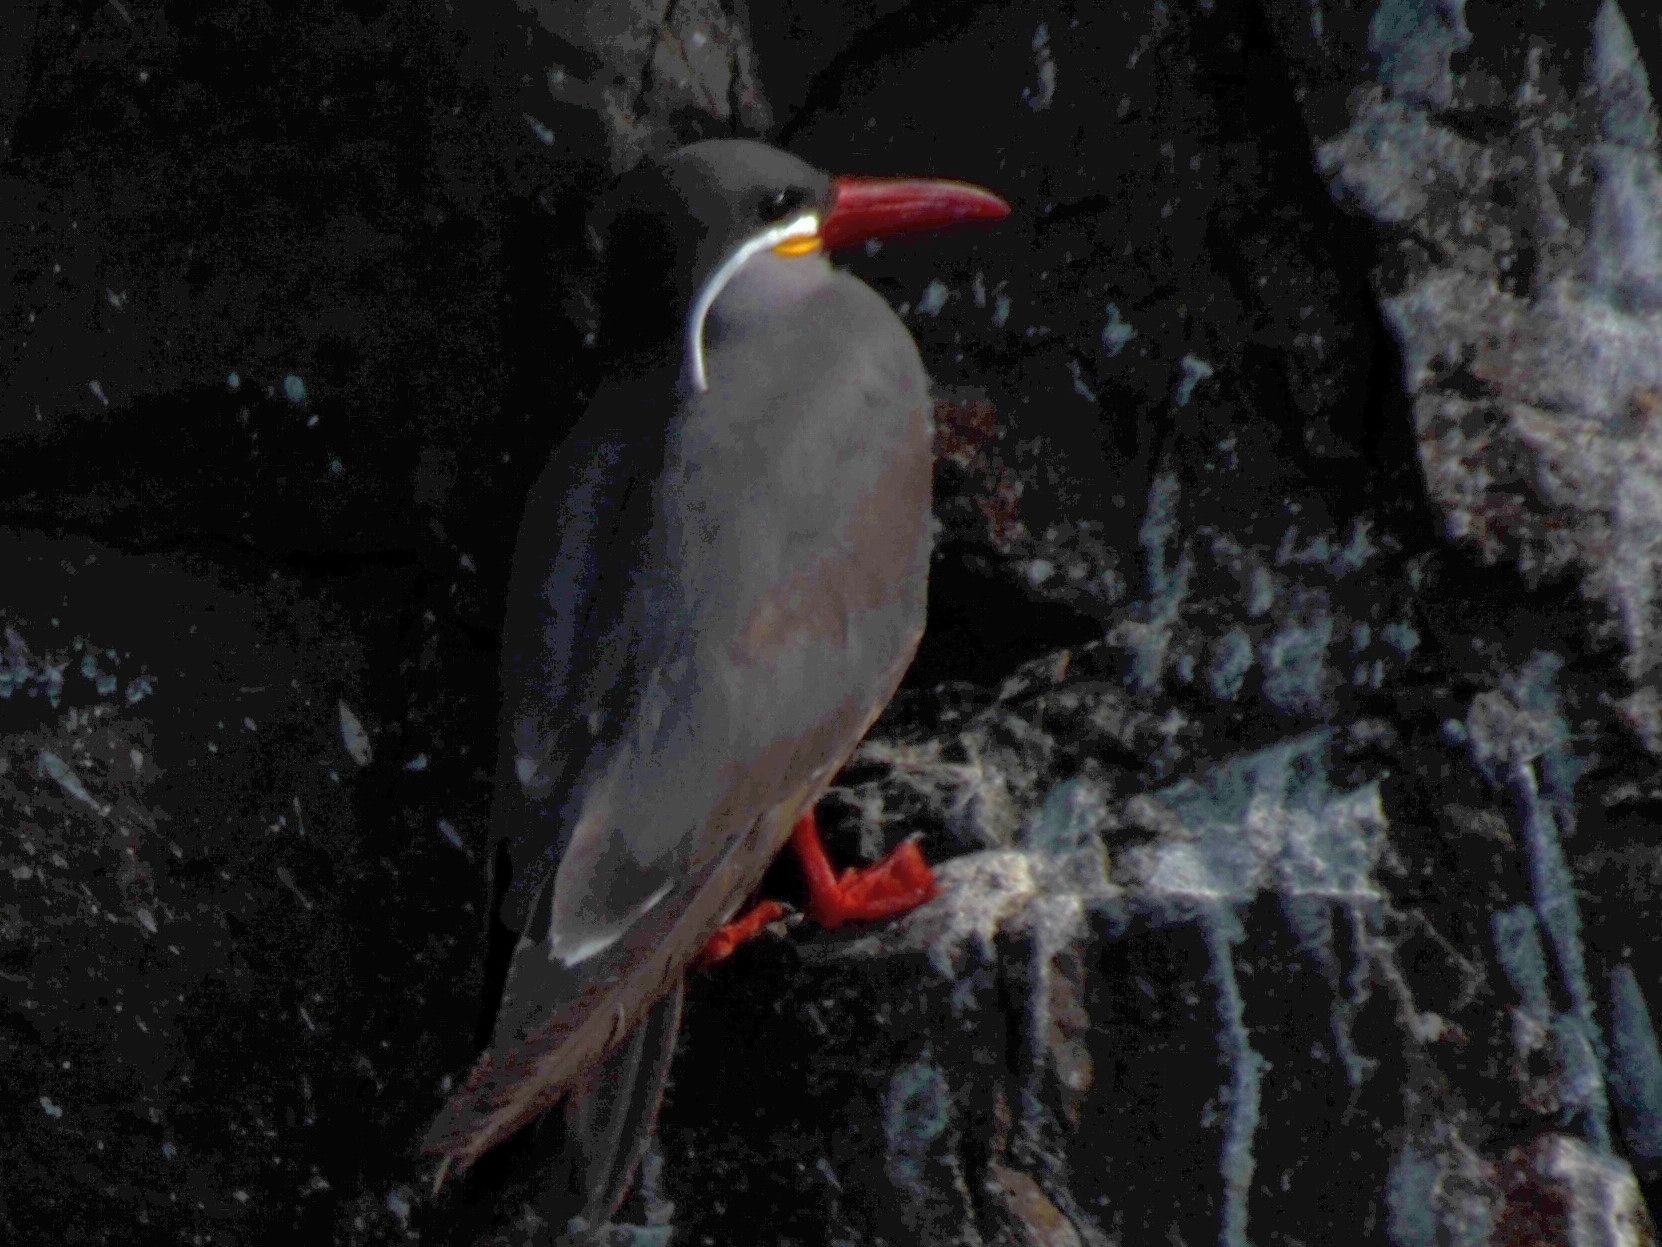 Click picture to see more Inca Terns.